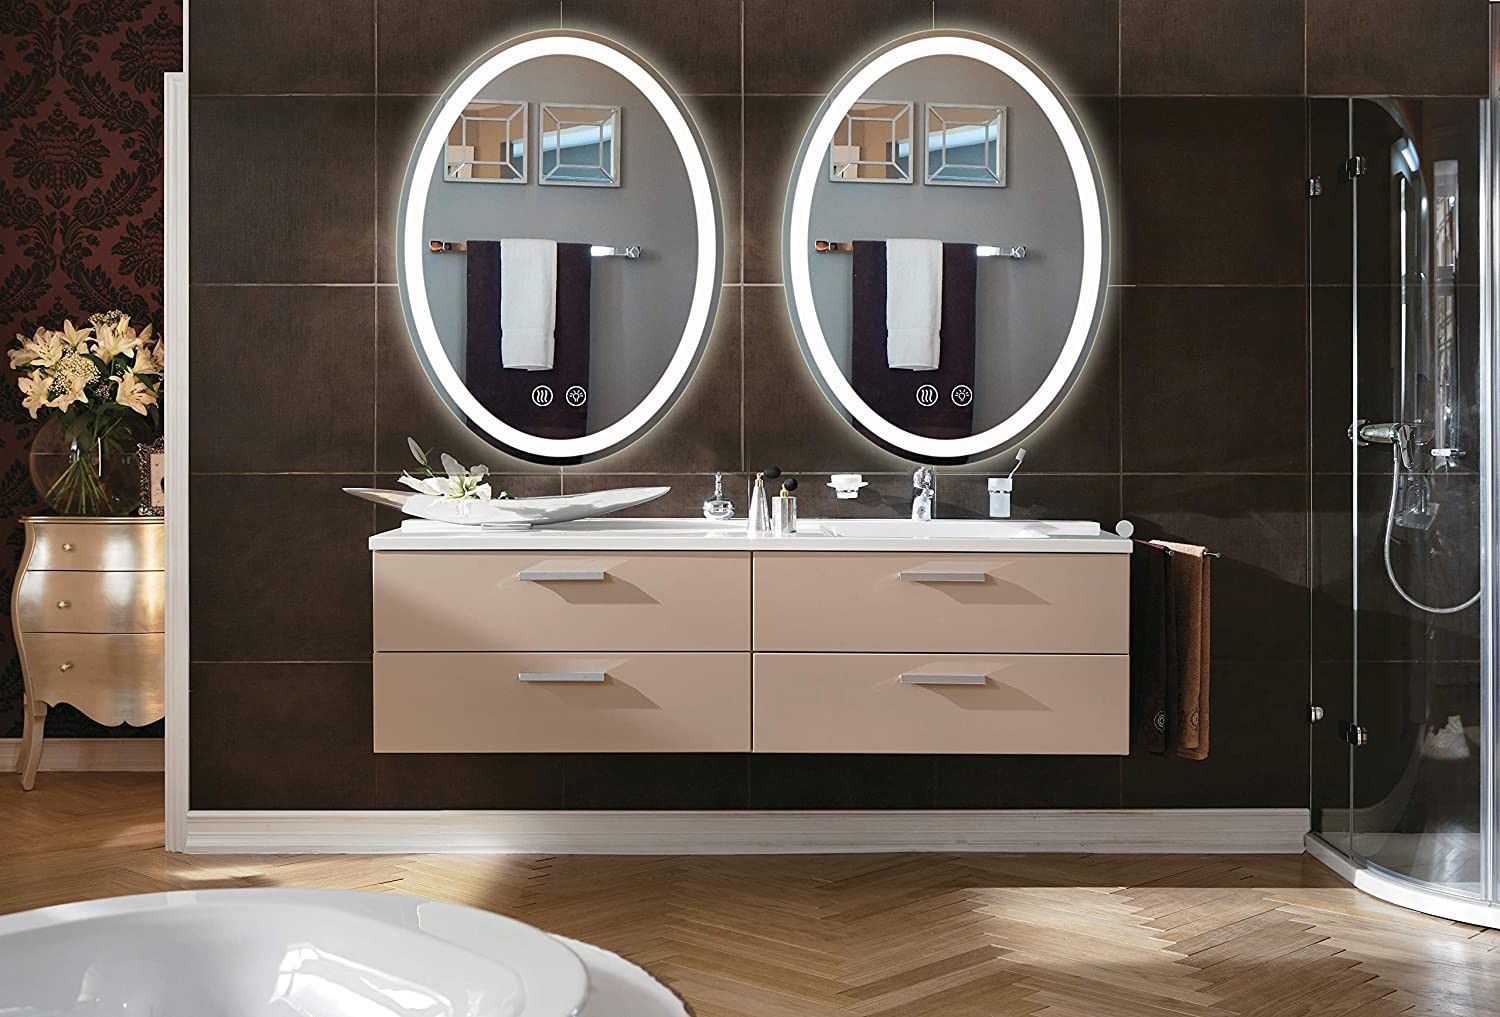 Wall Mounted Anti-Fog Dimmable Touch Button Mirror LED Lighted Oval Vanity Bathroom Makeup Mirrors with Magnifier